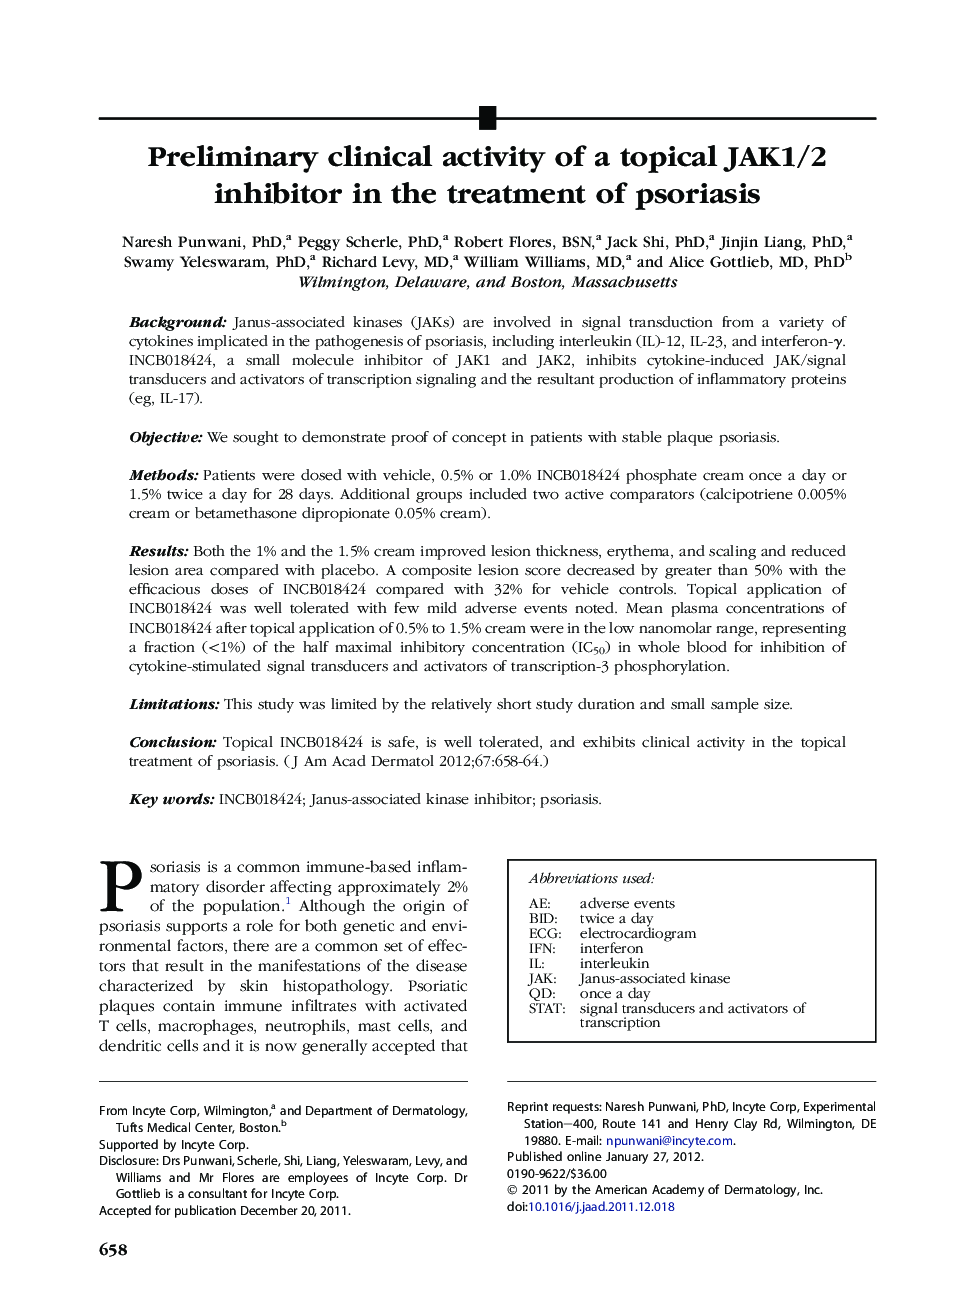 Preliminary clinical activity of a topical JAK1/2 inhibitor in the treatment of psoriasis 